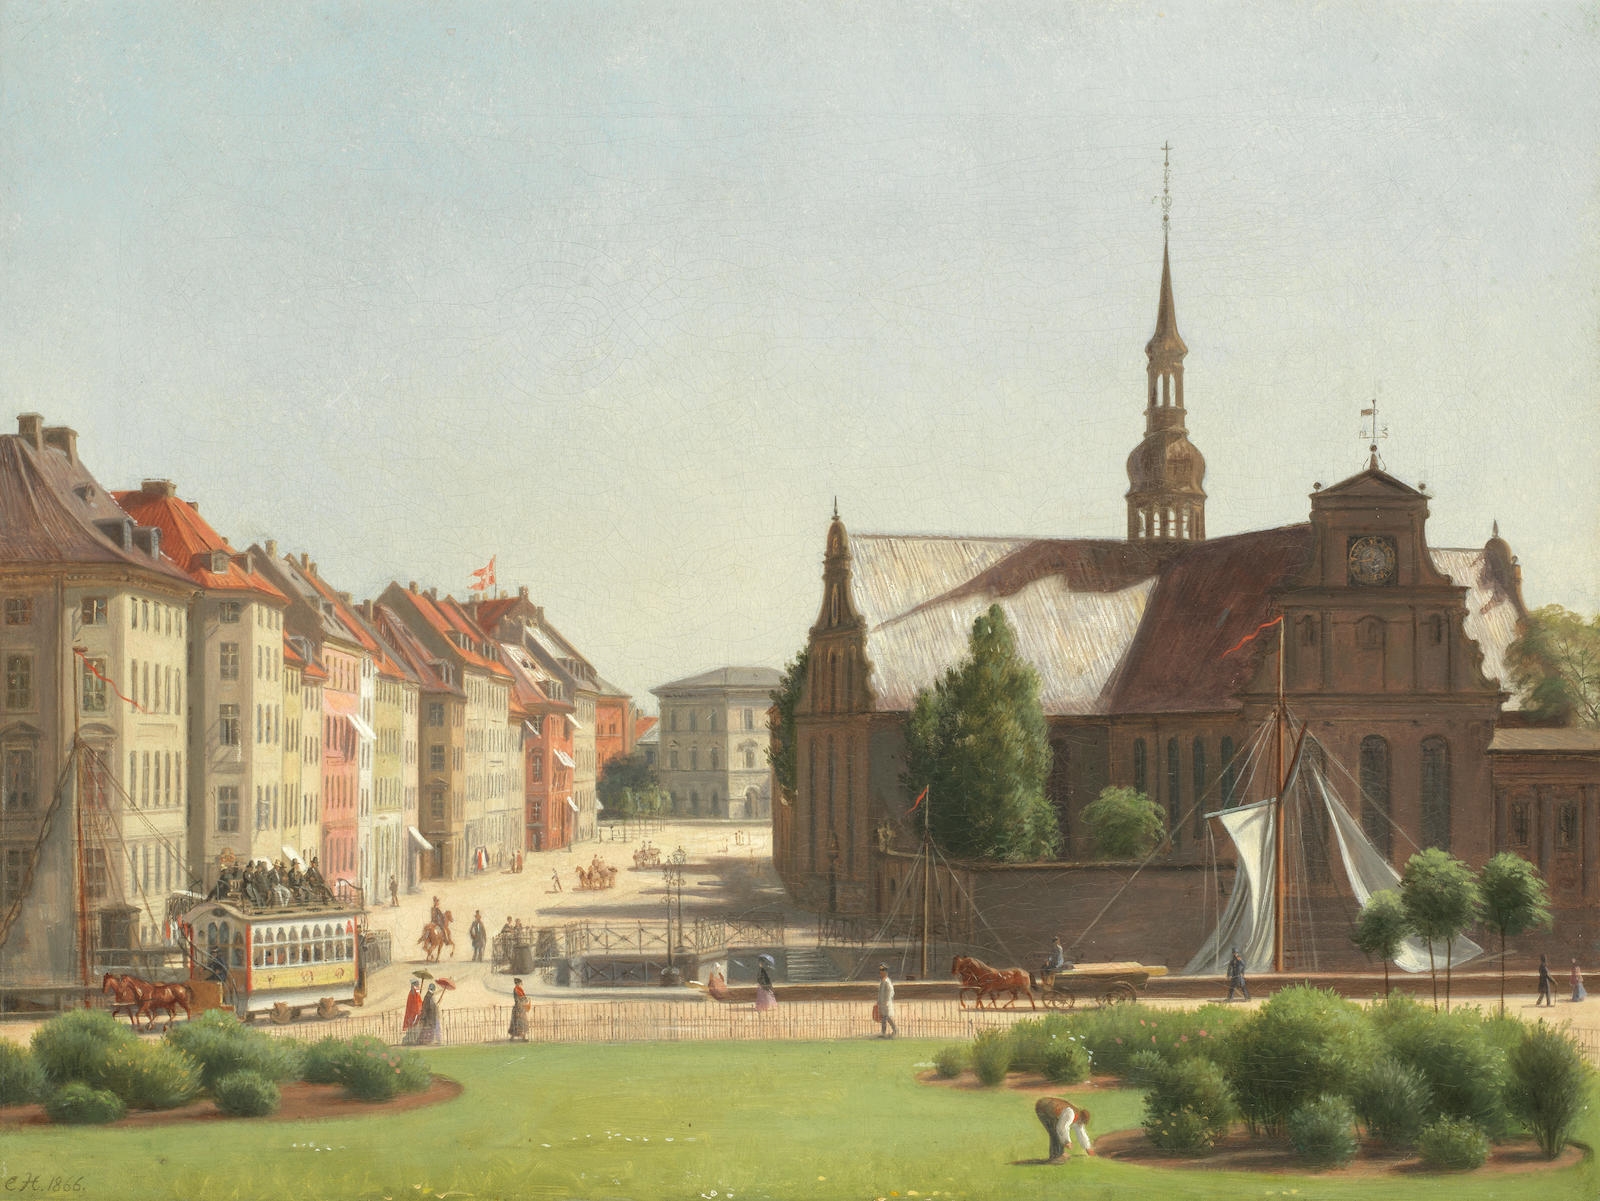 View of Holmes Kirke across Slotsplads from Christiansborg by Carl Christian Constantin Hansen, 1866